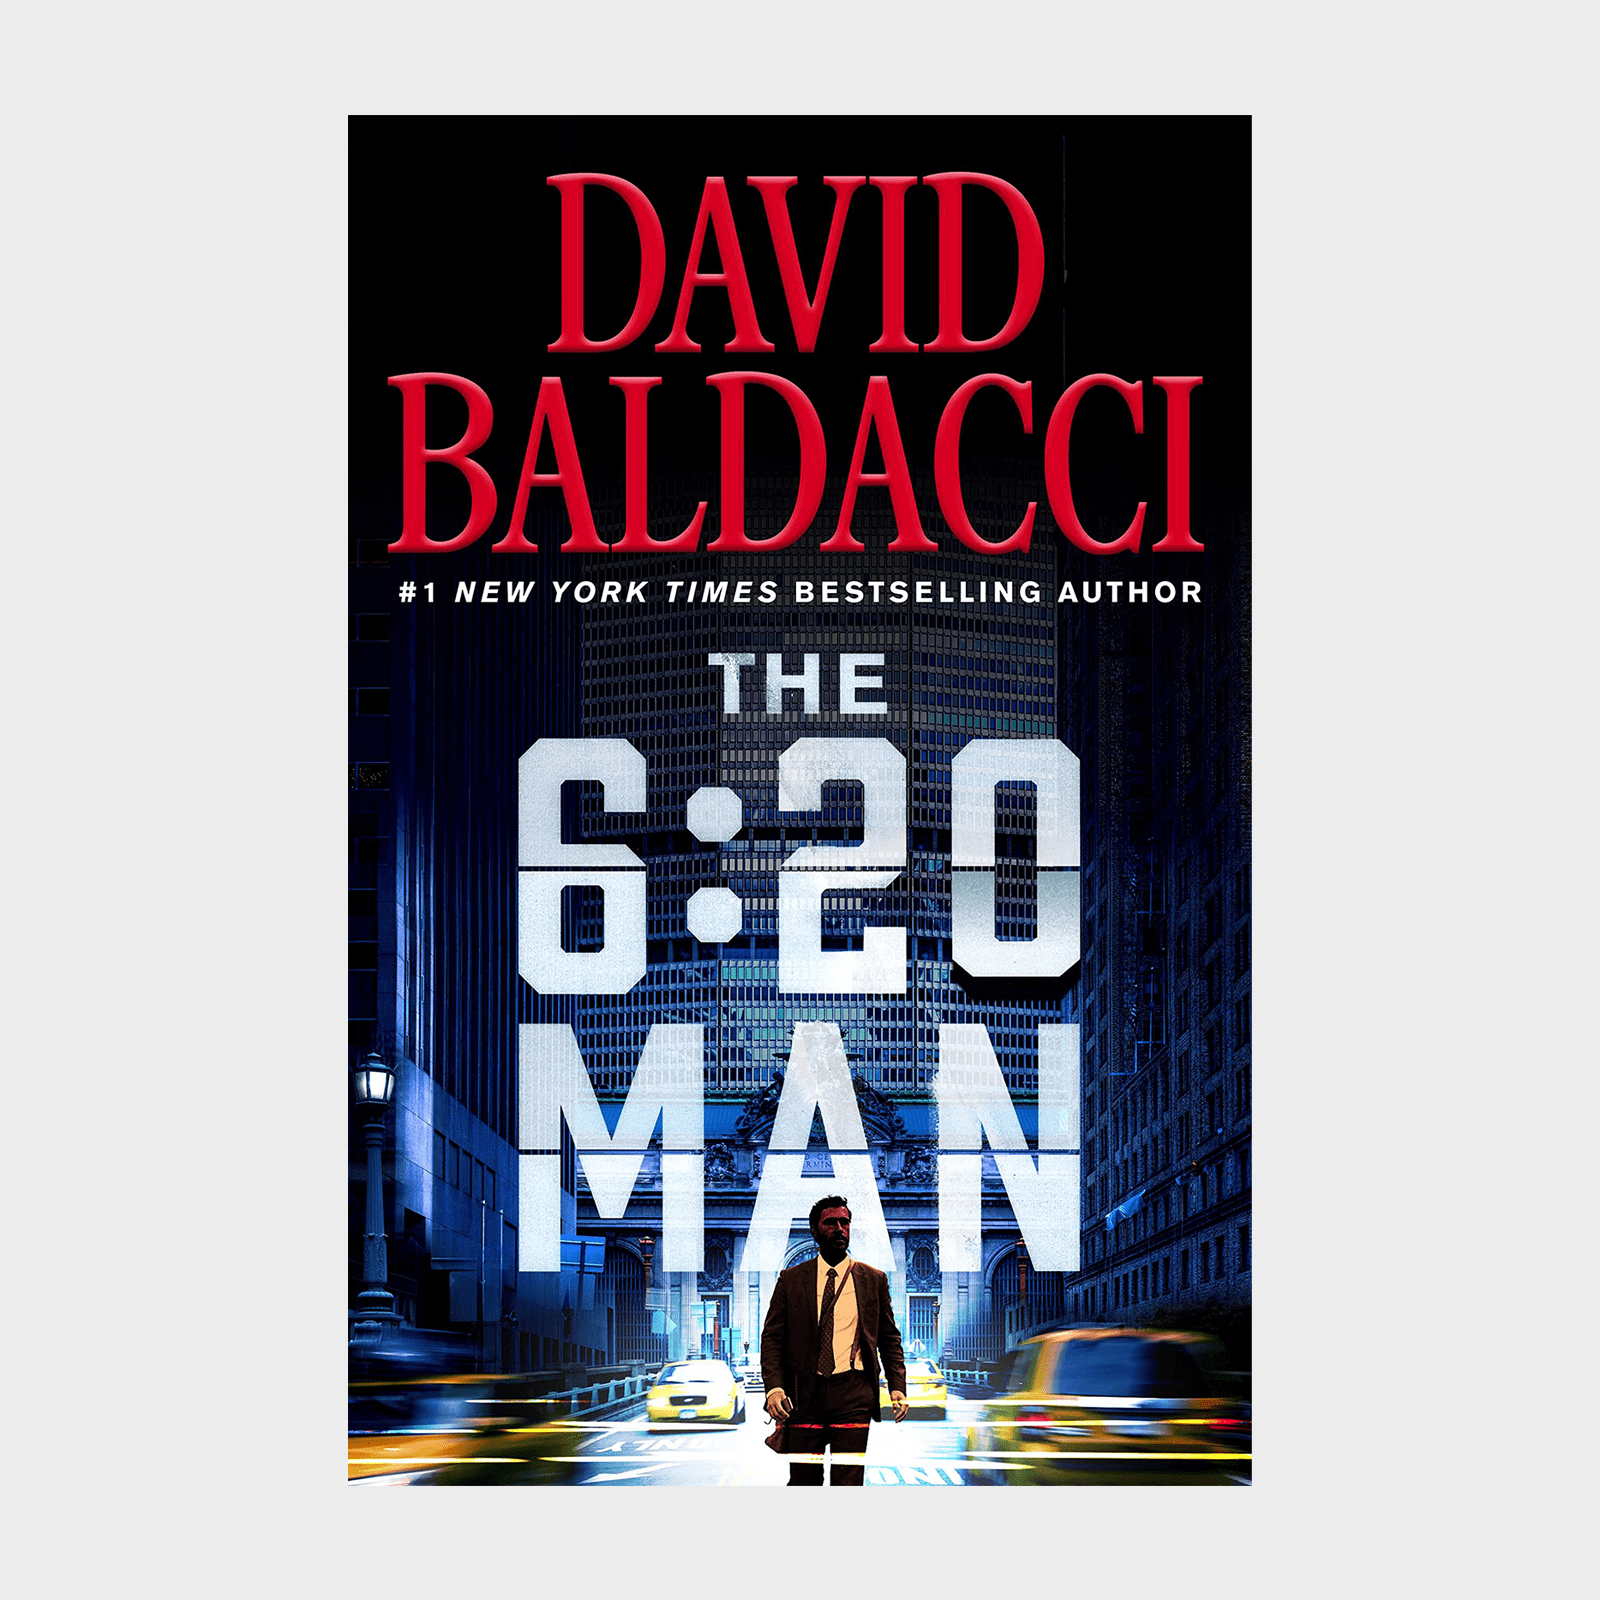 <p><strong>Release date: </strong>July 12, 2022</p> <p>Travis Devine, the main character of <a href="https://www.amazon.com/6-20-Man-David-Baldacci/dp/1538719843/" rel="noopener noreferrer"><em>The 6:20 Man</em></a>, is a man of routine. Every morning, he puts on a cheap suit, picks up his cheap briefcase and heads out on the 6:20 train to Manhattan. Every day, he peers out the train window and dreams about living large like one of the elite financial investors he sees in passing. Then one day, everything changes. He's blackmailed into participating in an investigation into those very investors. As he infiltrates their lavish lives and learns more about their shady schemes, he finds himself in the crosshairs of a murderer.</p> <p class="listicle-page__cta-button-shop"><a class="shop-btn" href="https://www.amazon.com/6-20-Man-David-Baldacci/dp/1538719843/">Shop Now</a></p>